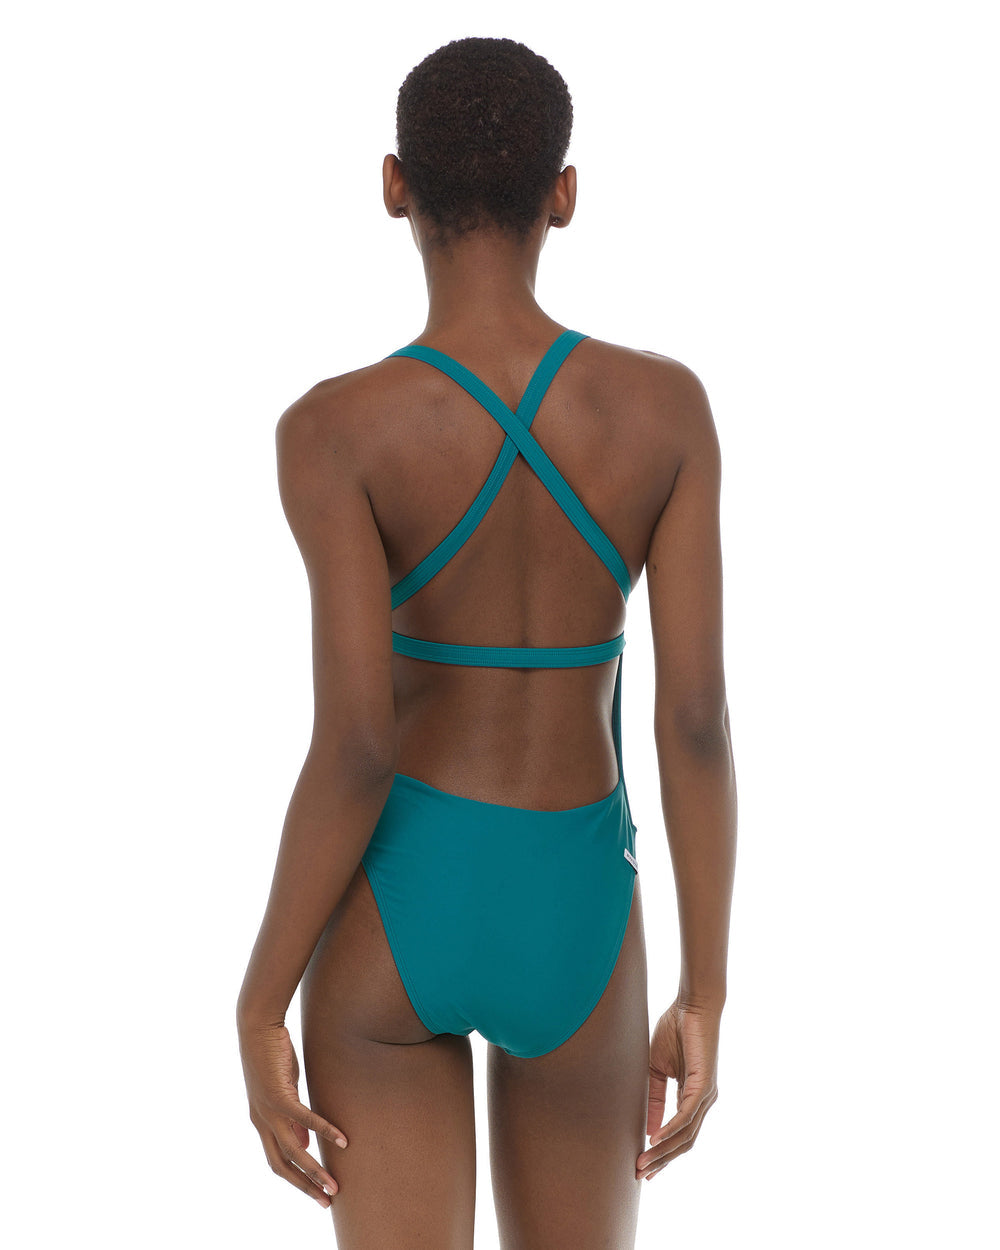 Body Glove Smoothies Electra One Piece Swimsuit - Kingfisher